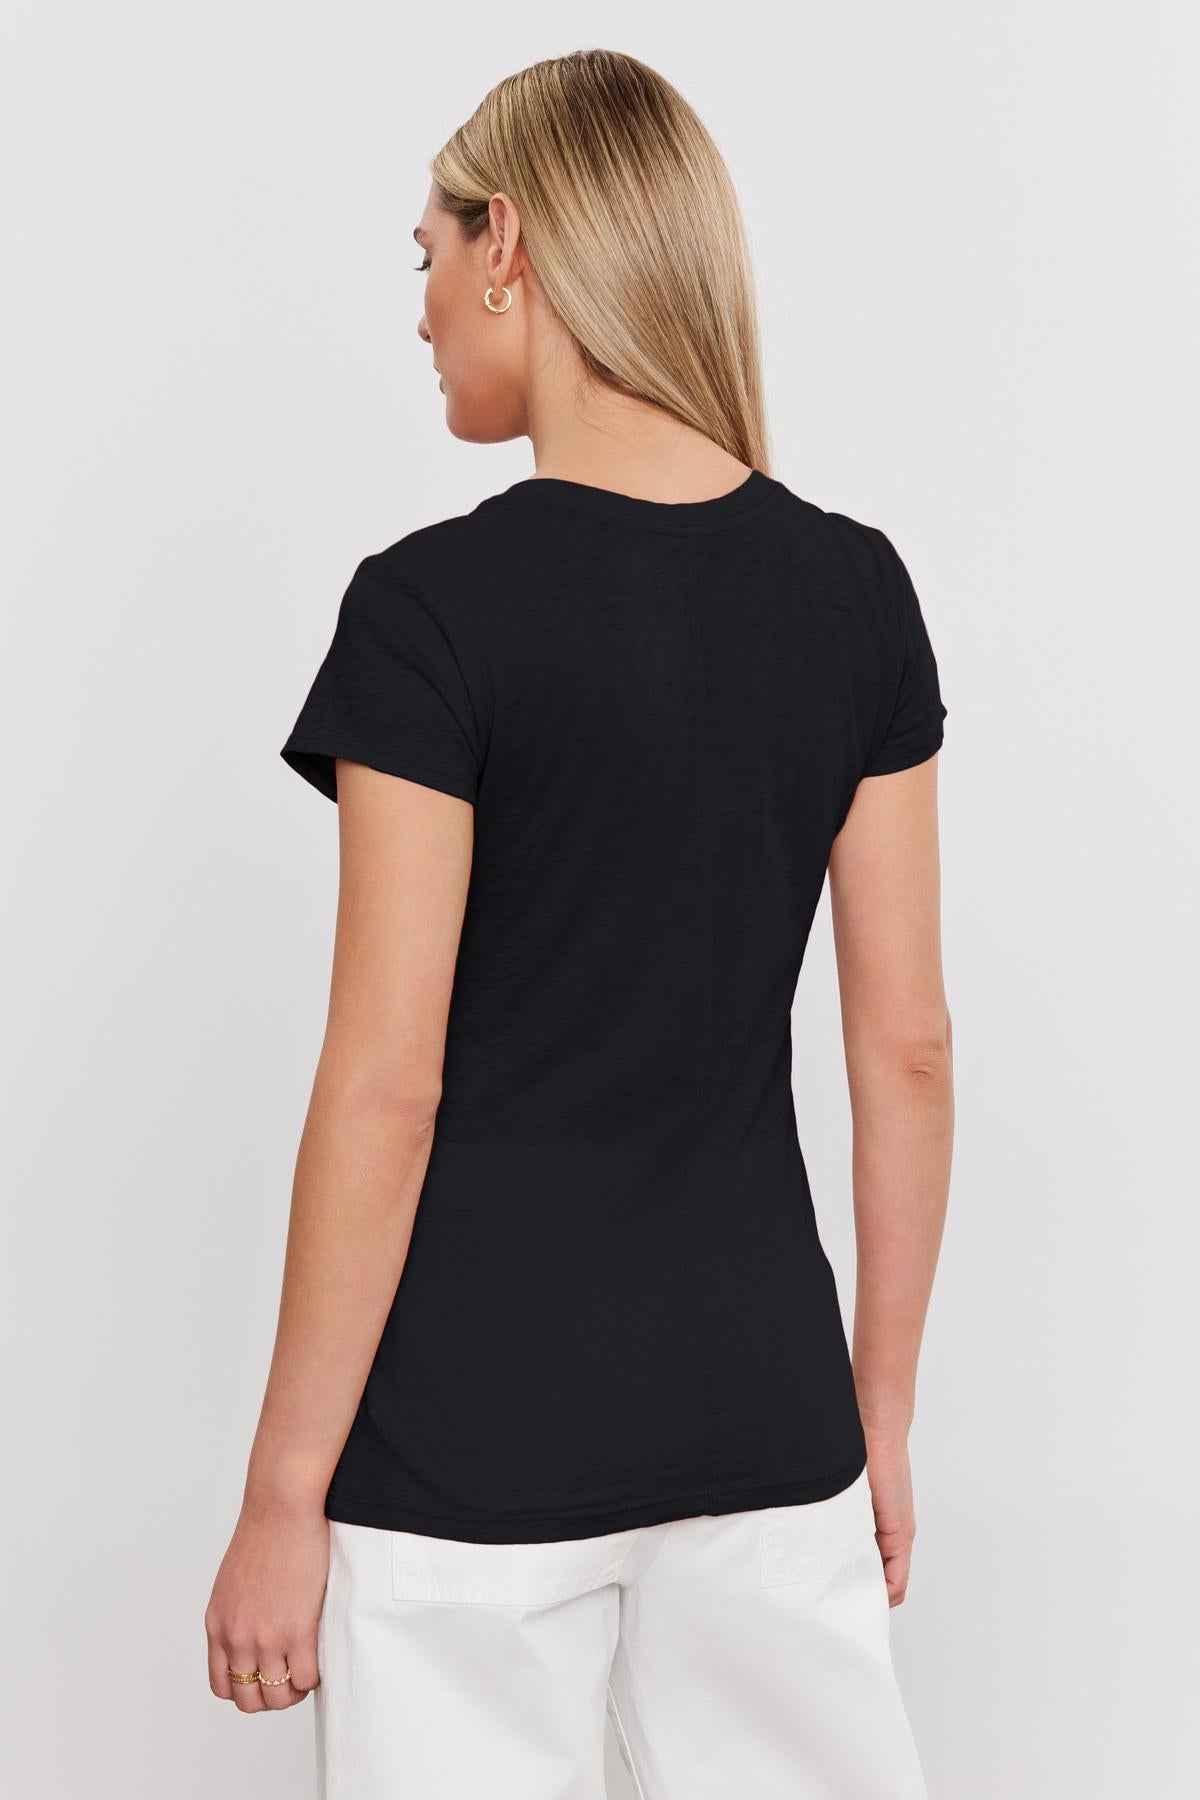   The woman is wearing a black ODELIA COTTON SLUB CREW NECK TEE by Velvet by Graham & Spencer. 